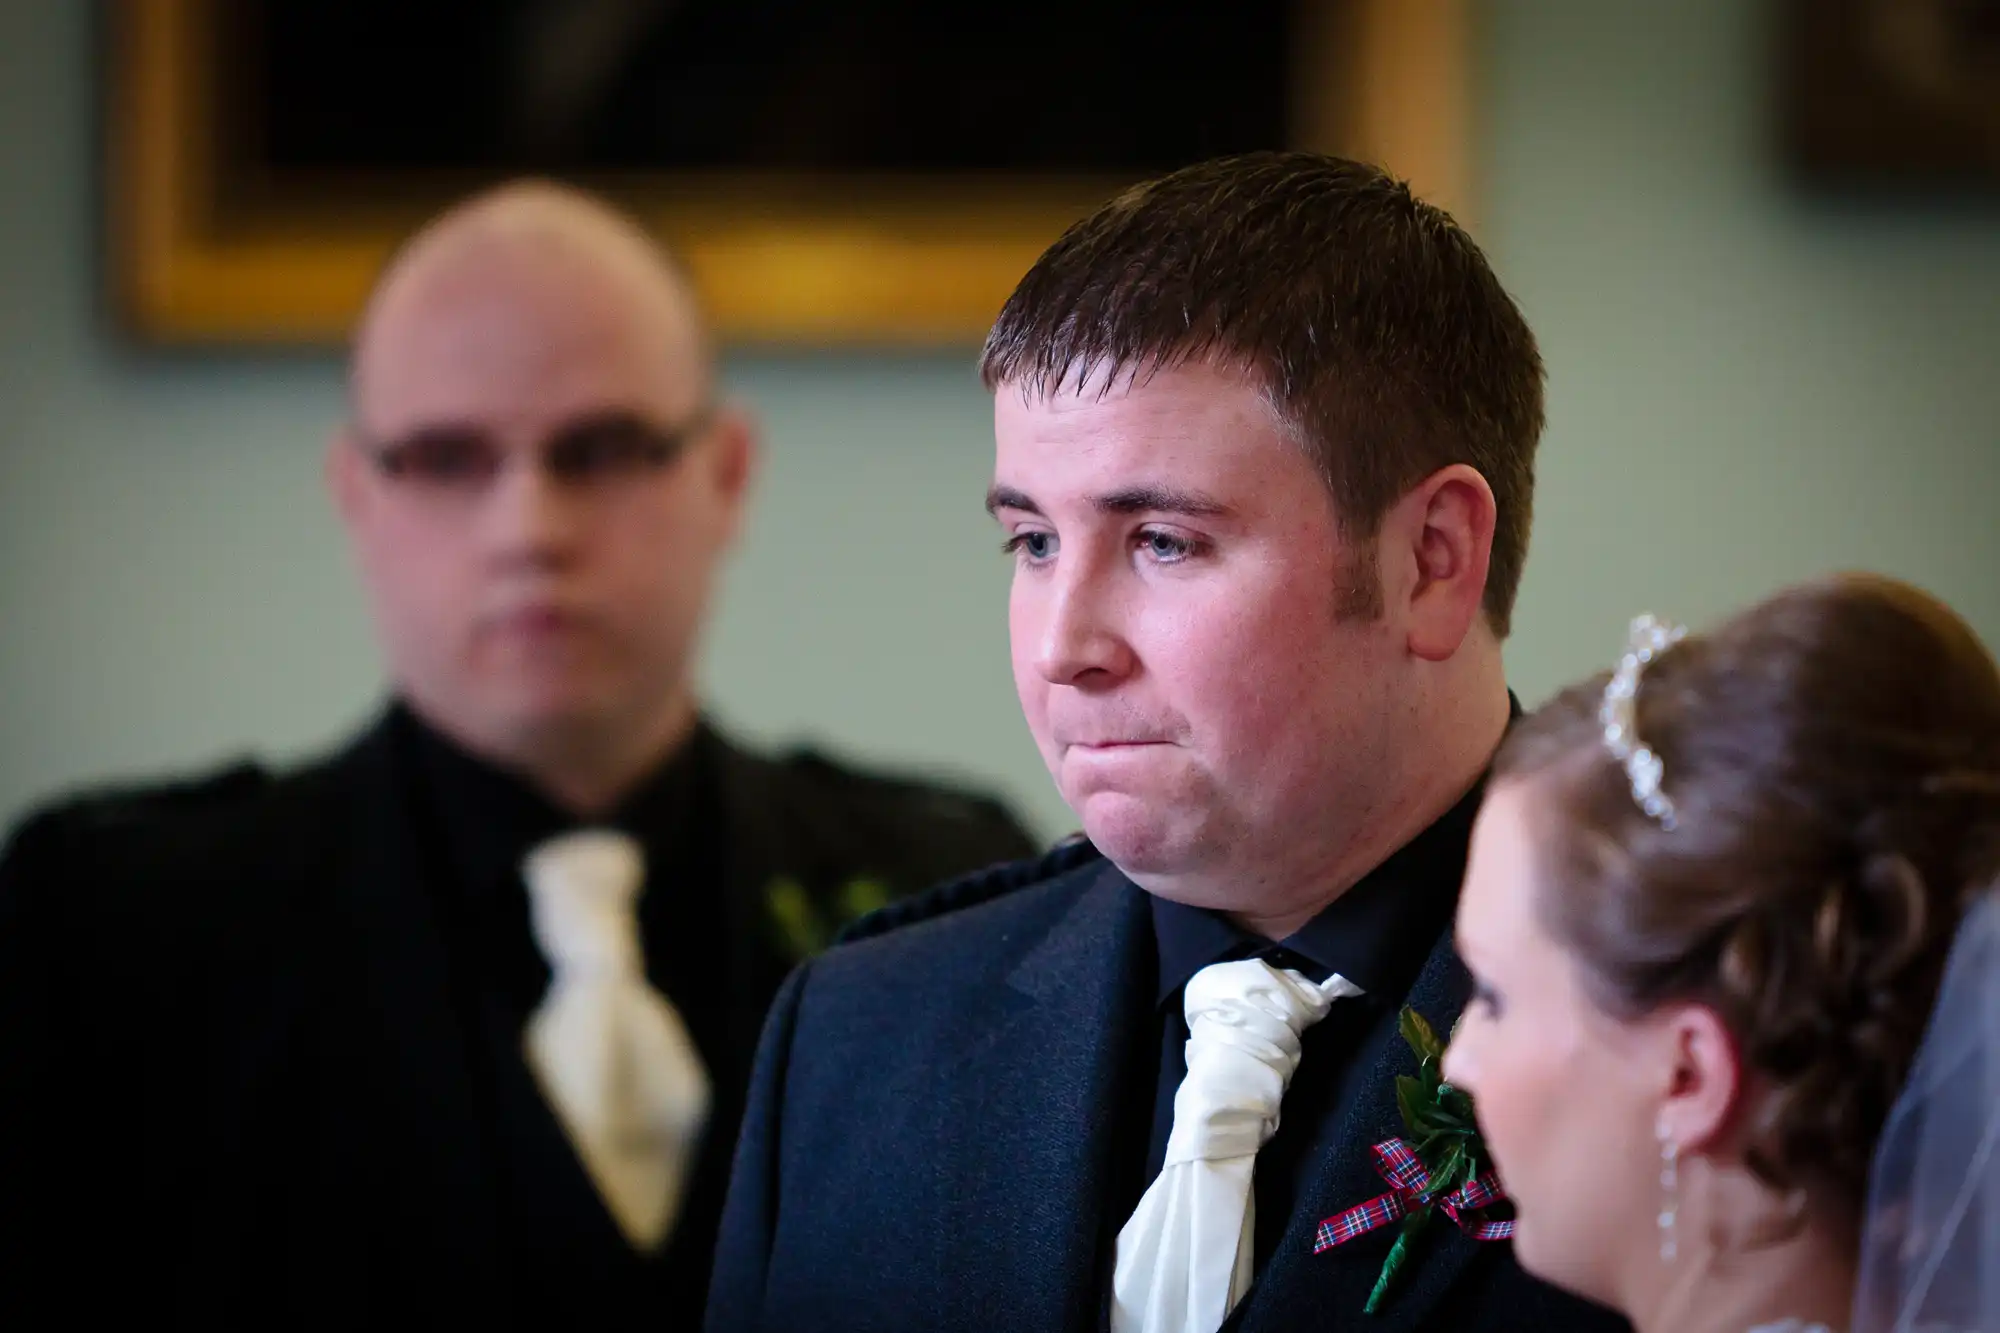 A groom in a dark suit with a tartan tie looks serious at a wedding ceremony, with a blurred figure in the background and a bride beside him.